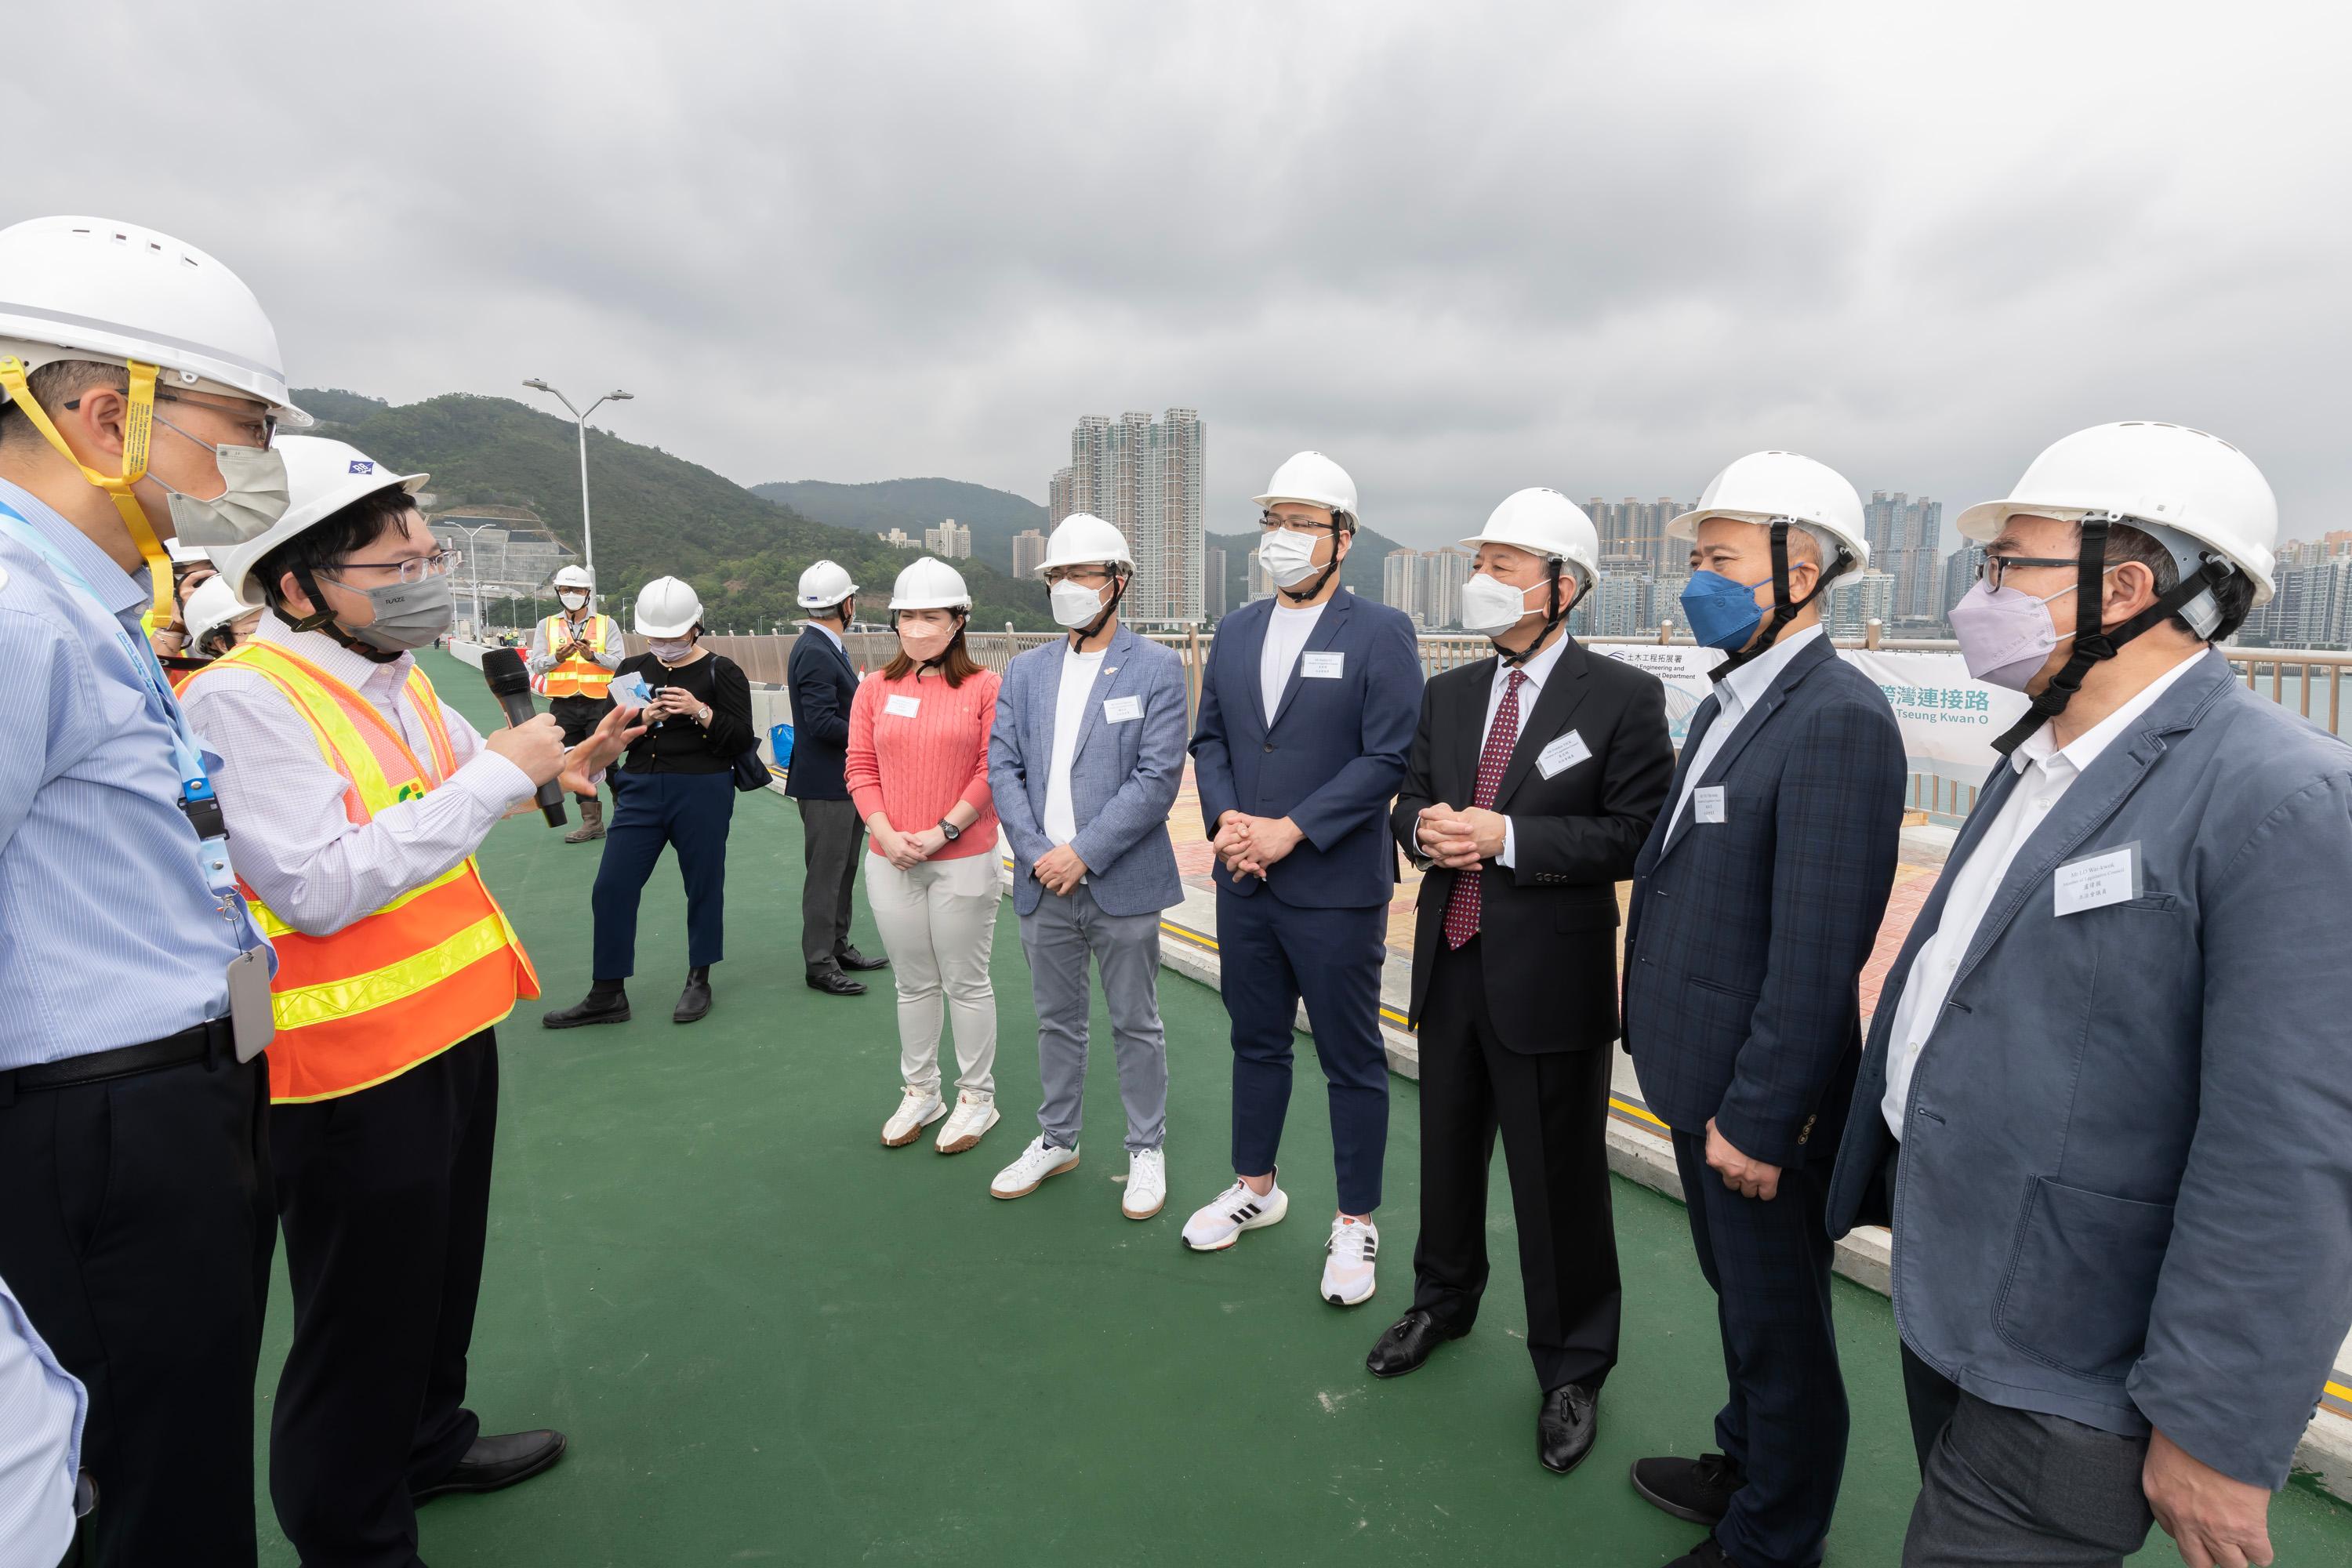 The Legislative Council (LegCo) Panel on Transport today (November 15) visited the Tseung Kwan O-Lam Tin Tunnel and Cross Bay Link, Tseung Kwan O. Photo shows LegCo Members visiting the marine viaduct of the Cross Bay Link, Tseung Kwan O, to learn about its design features.